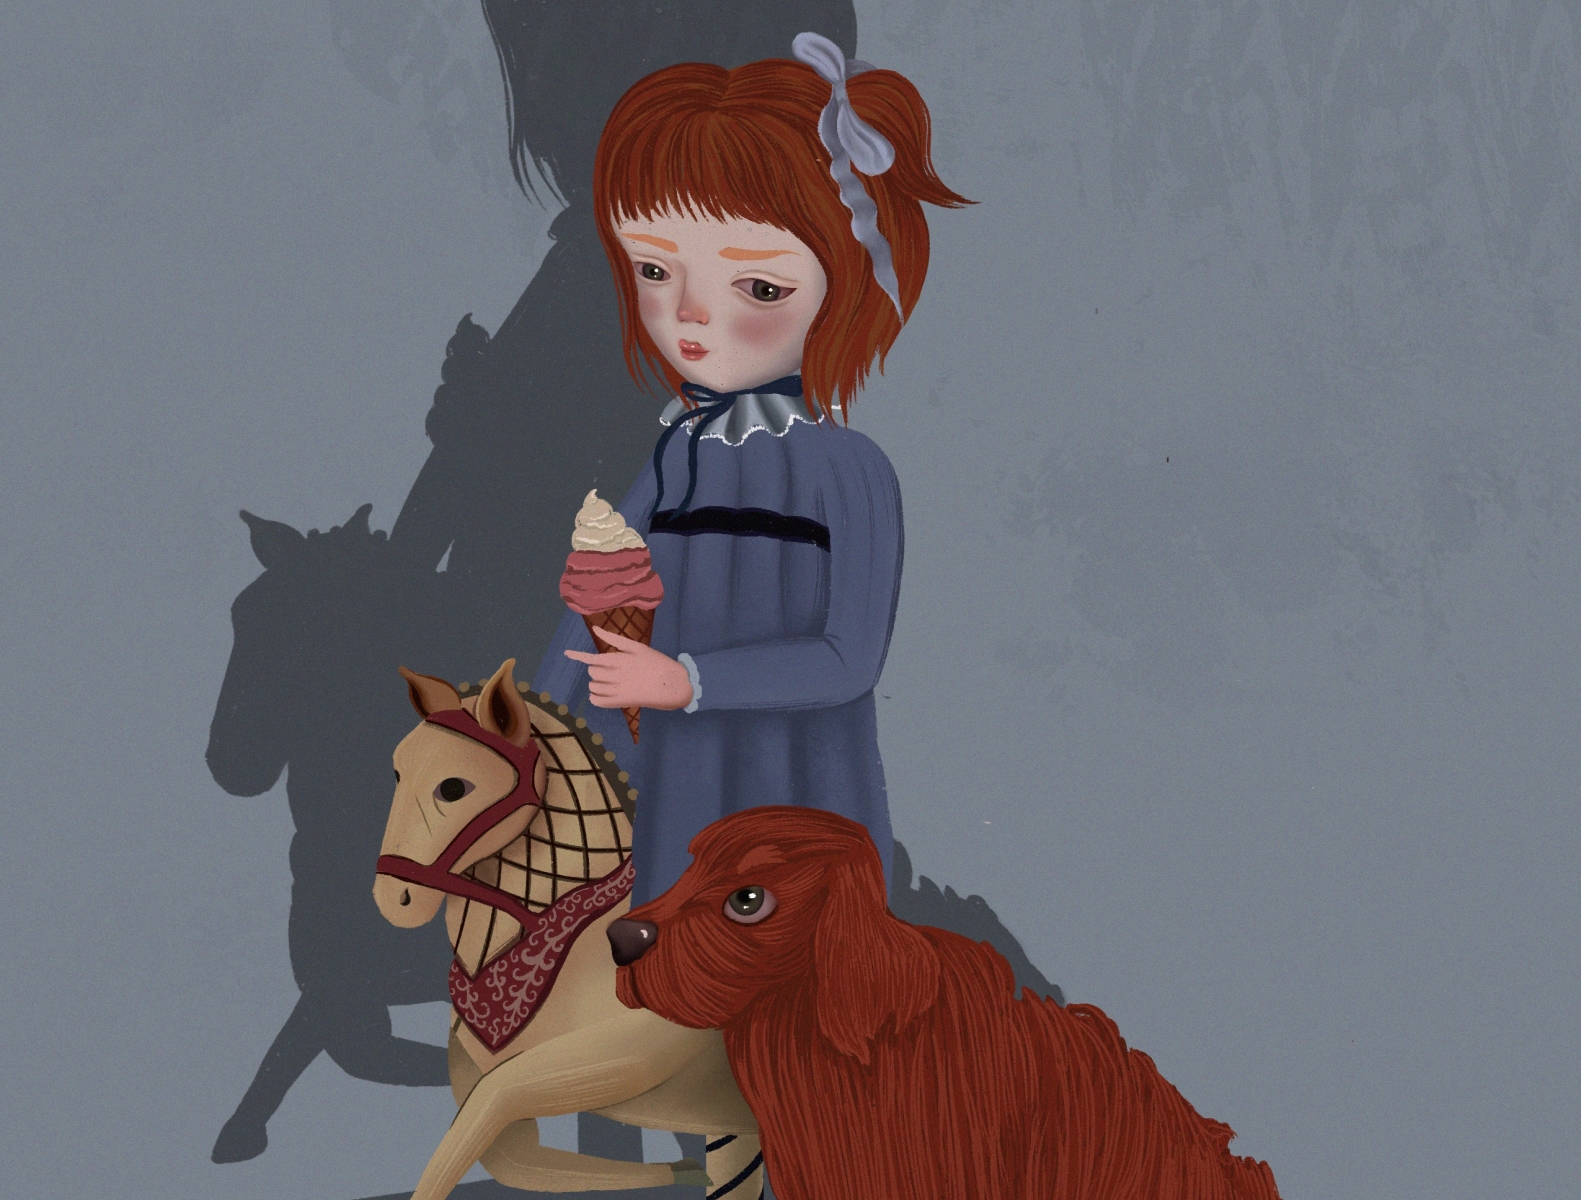 girl with a dog art illustration character design children children book illustration color palette illustration illustration art ipadproart palette procreate